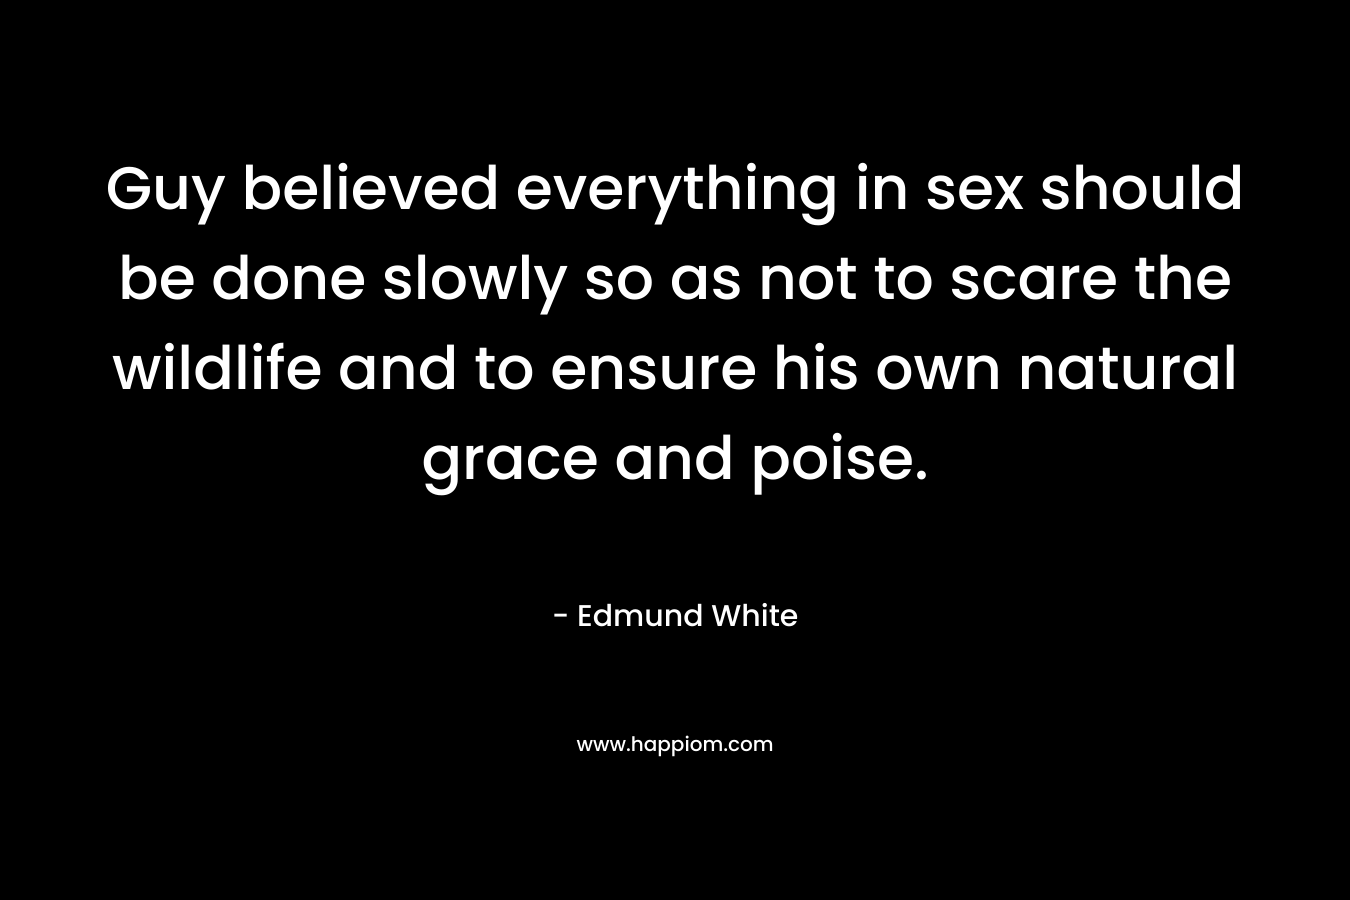 Guy believed everything in sex should be done slowly so as not to scare the wildlife and to ensure his own natural grace and poise. – Edmund White